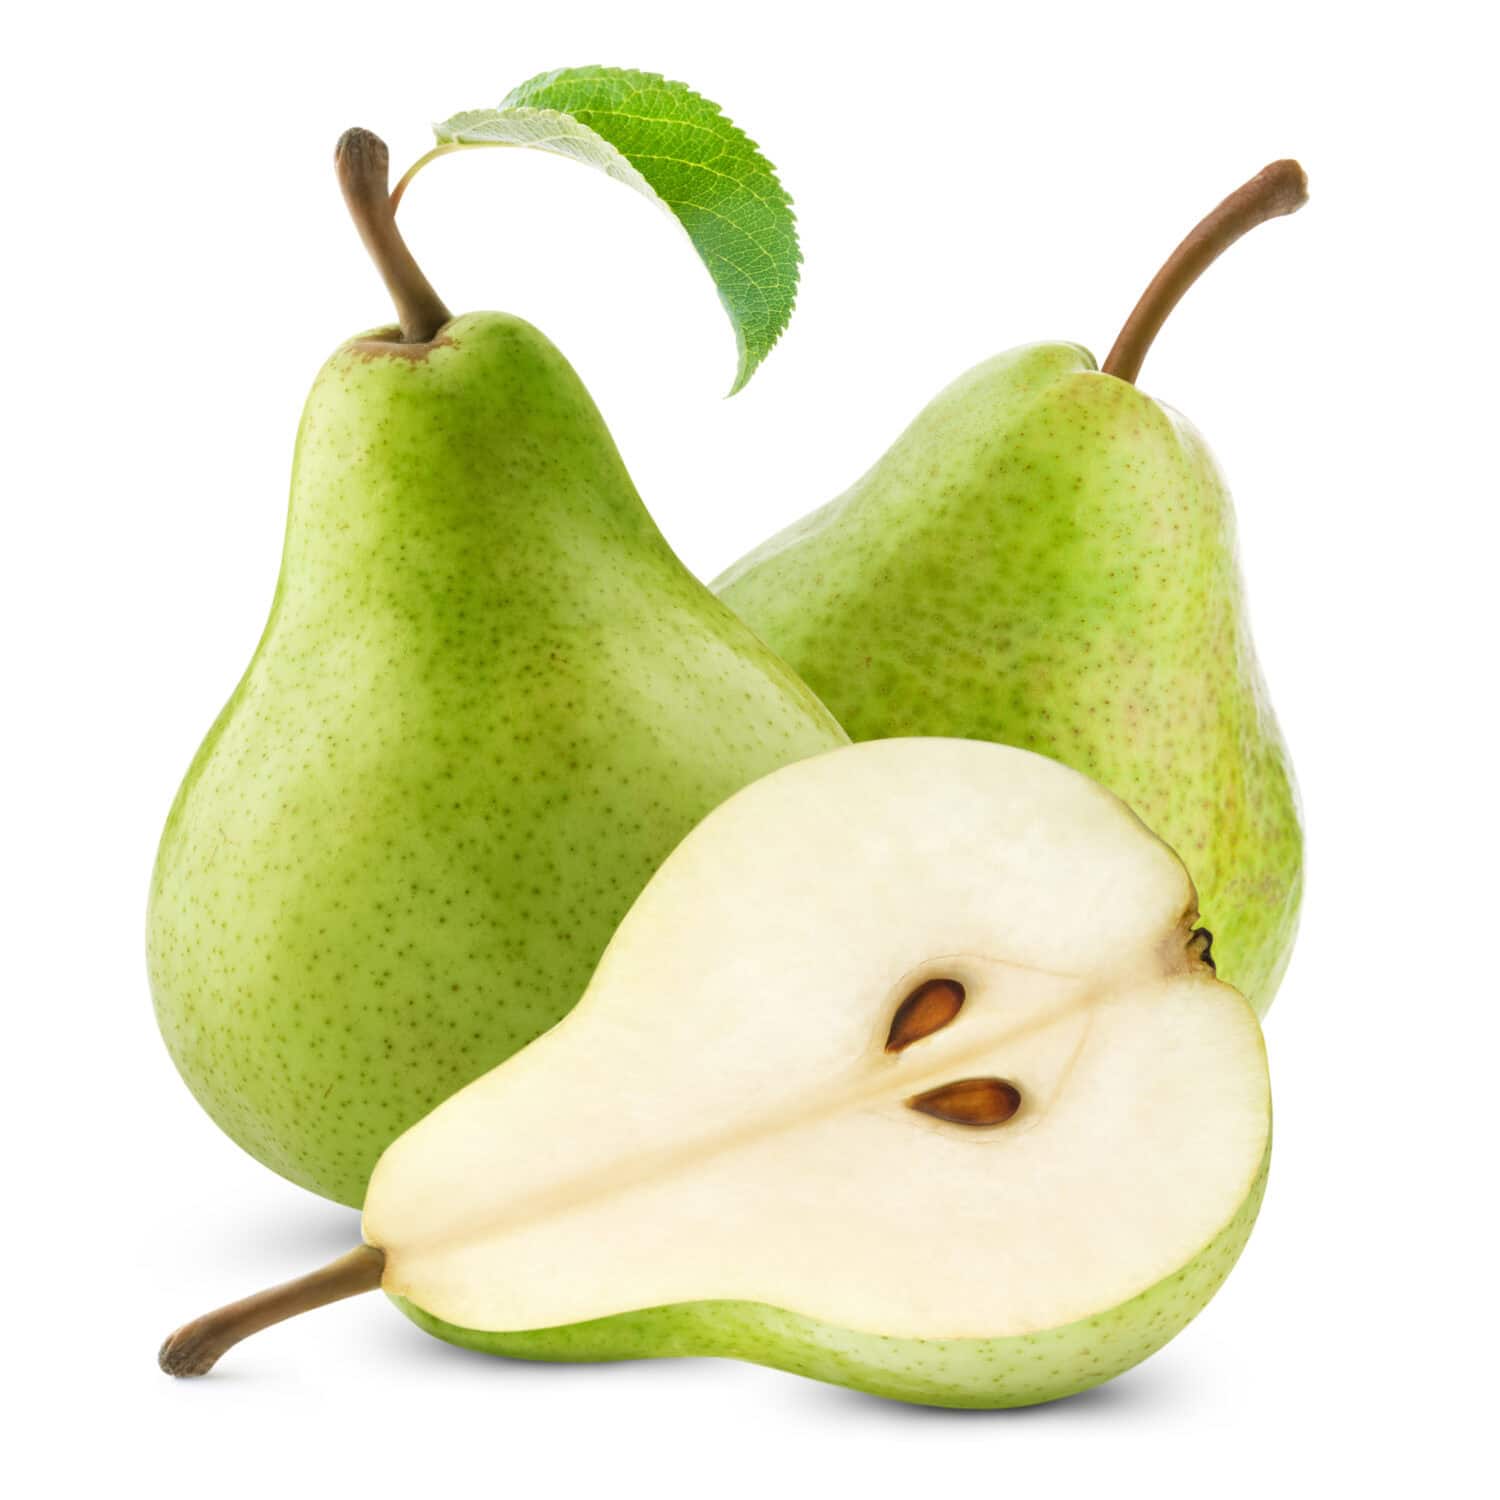 ripe pears with leaf isolated